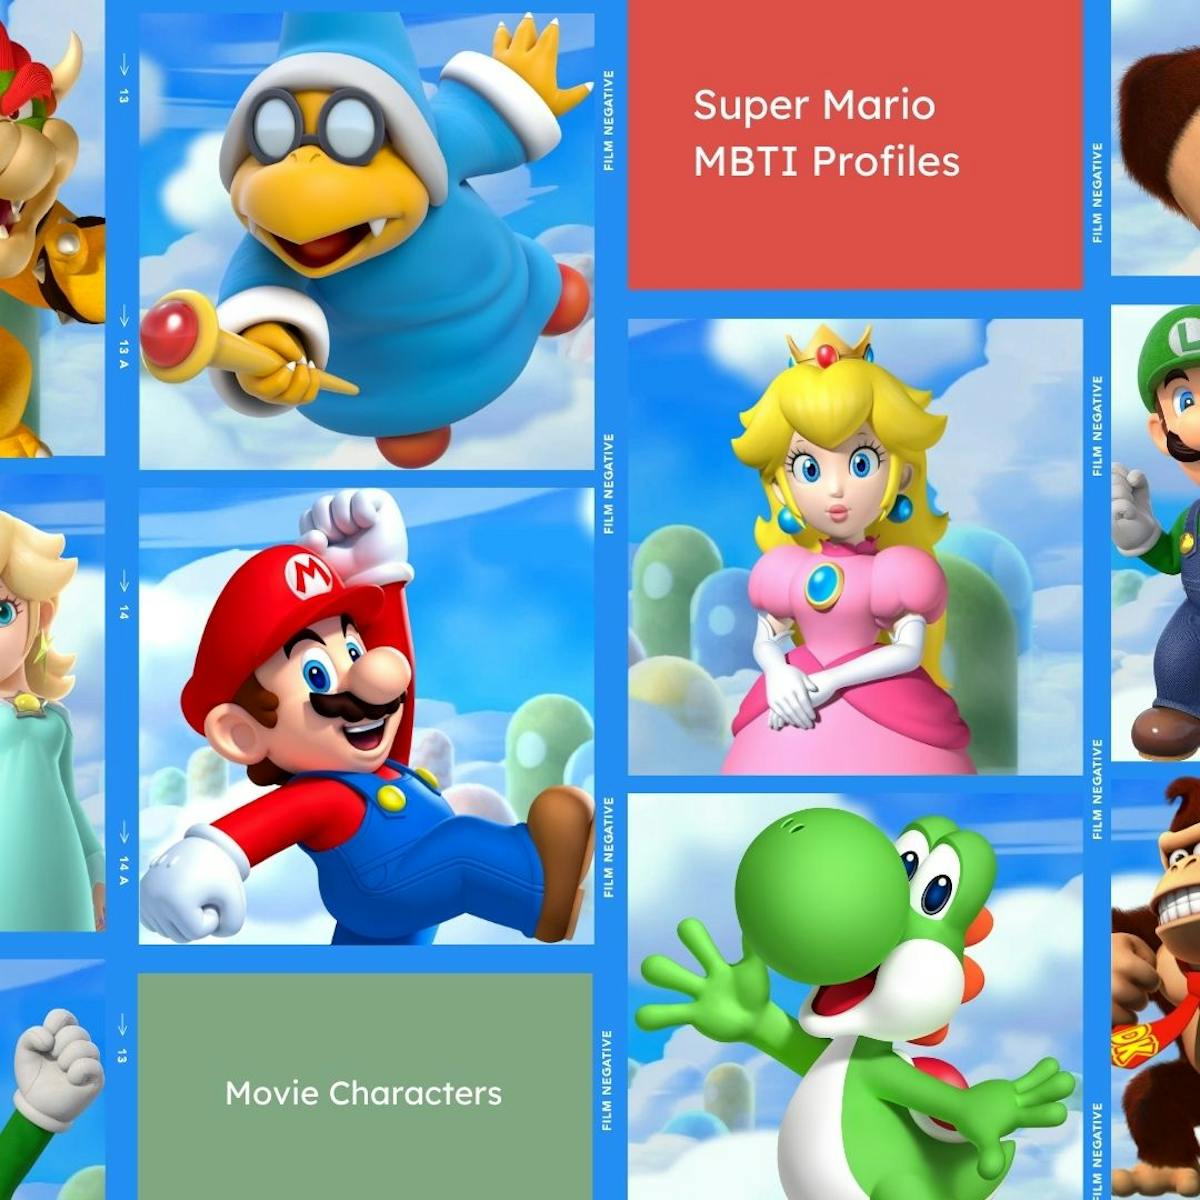 Super Mario Characters and their MBTI Profiles